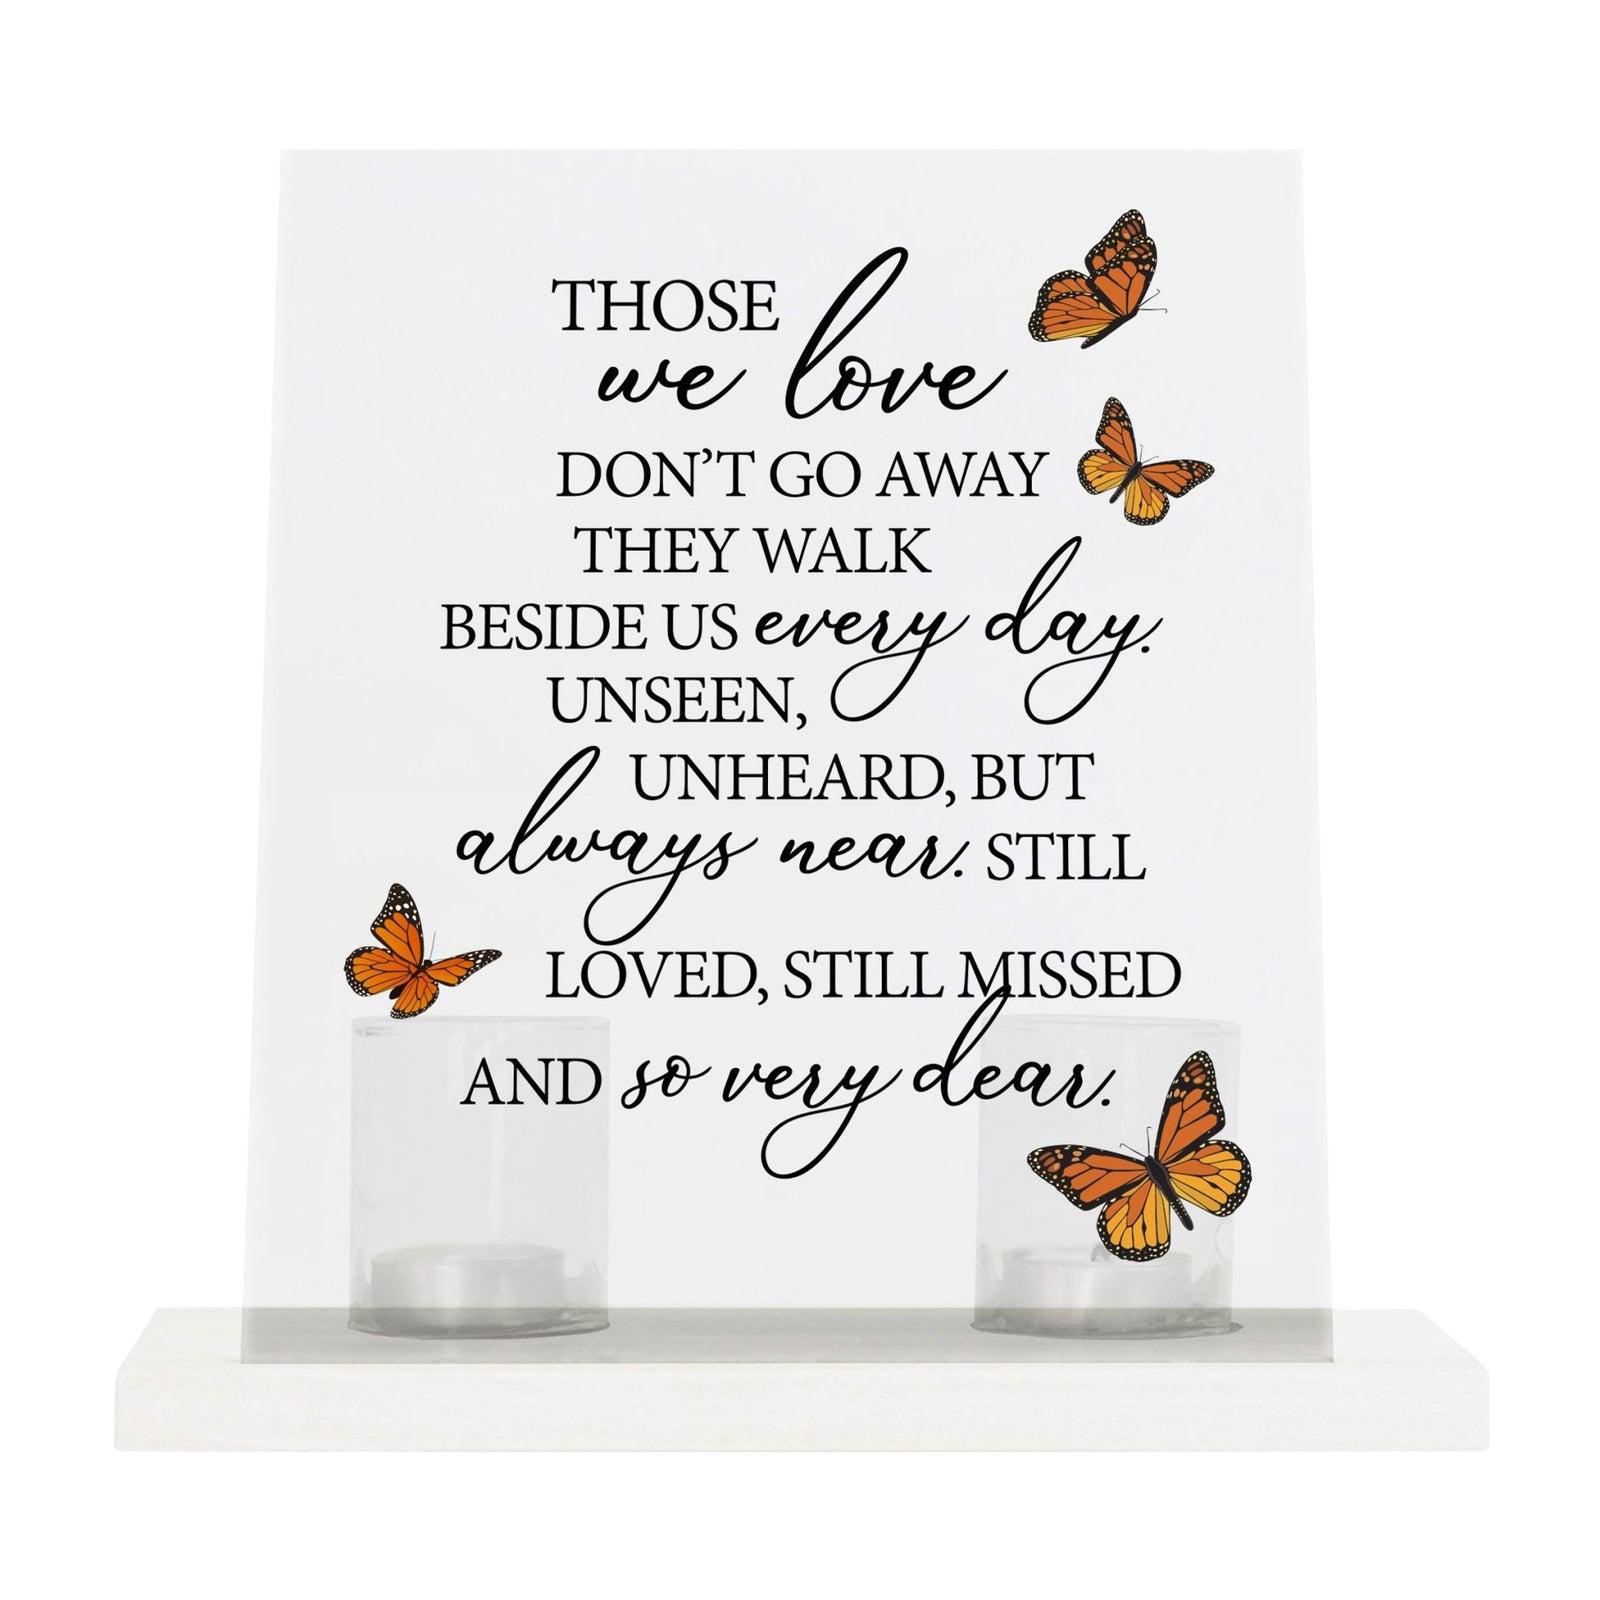 Memorial 8x10 Acrylic Wall Sign with Wooden Base Votive Candle Holder - Those We Love (butterflies) - LifeSong Milestones